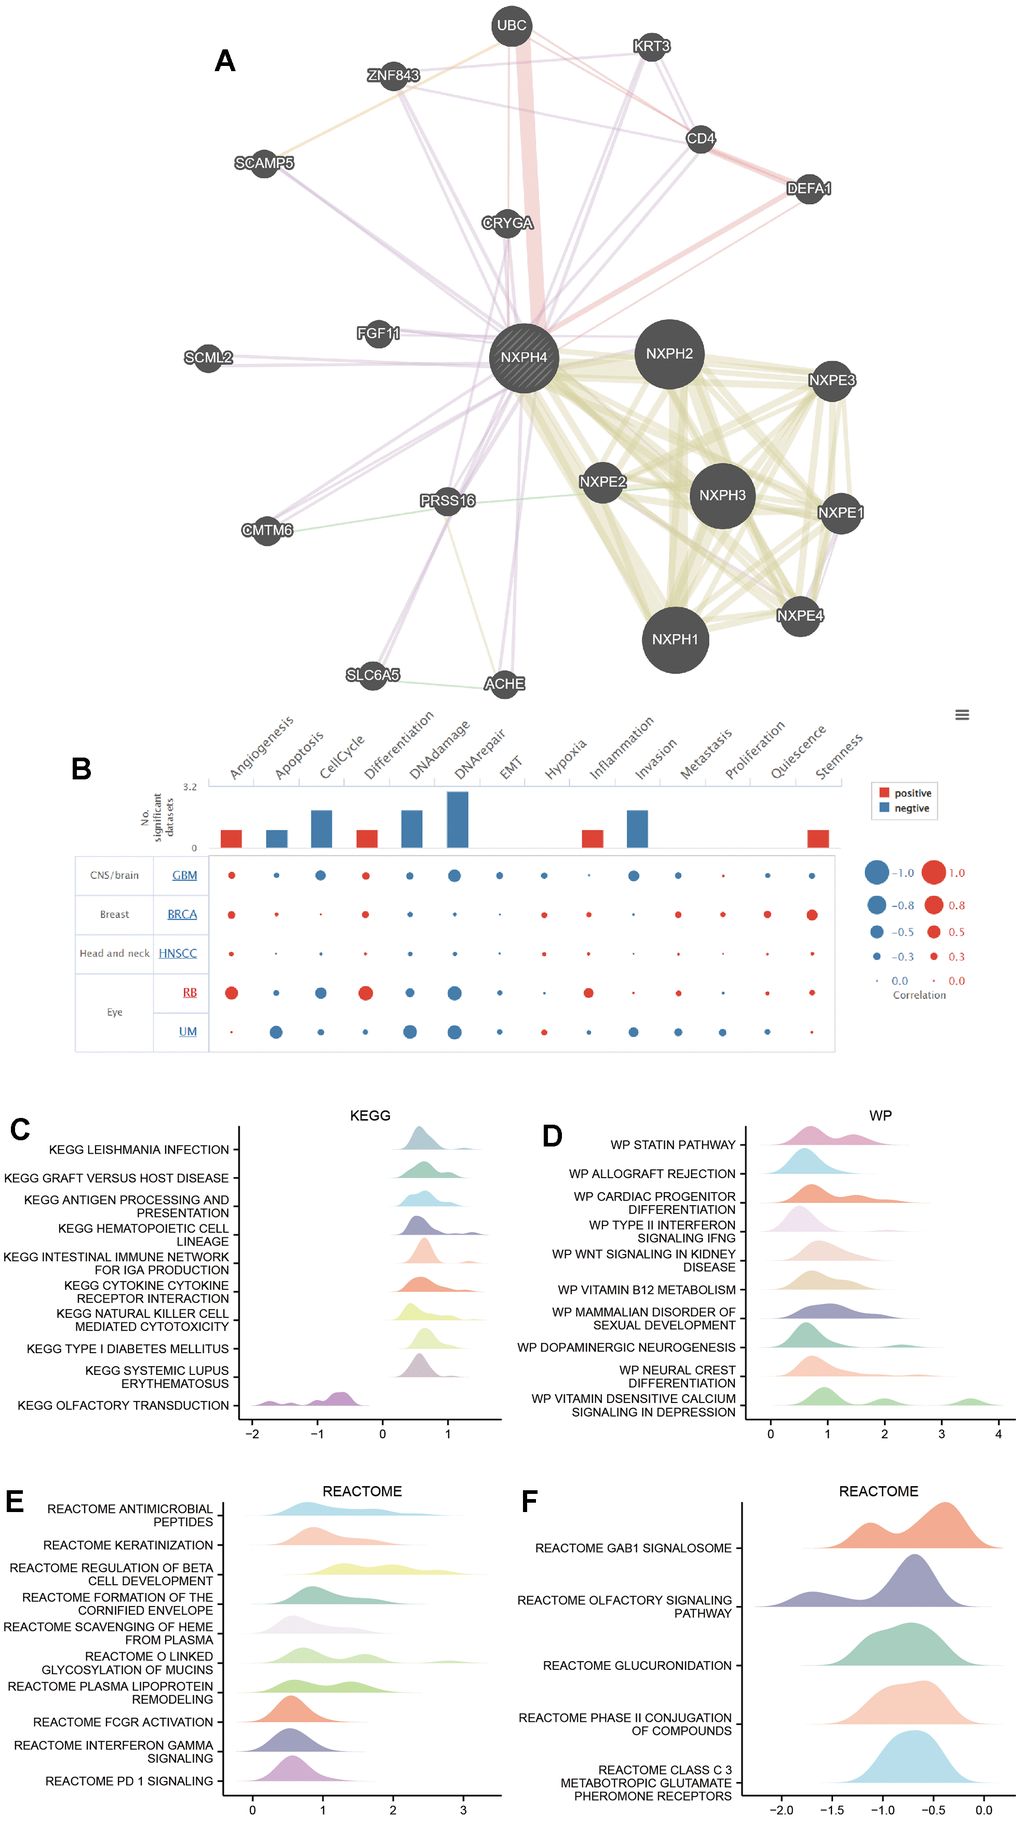 PPI network and functional enrichment analysis. (A) GeneMANIA database was used to analyze the 20 proteins that NXPH4 interacts with. (B) CancerSEA database analysis of NXPH4 in relation to 14 biological processes in various cancers. (C) KEGG-based GSEA analysis of NXPH4 in colon cancer. (D) Wp-based GSEA analysis of NXPH4 in colon cancer. (E, F) Reactome-based GSEA analysis of NXPH4 in colon cancer.